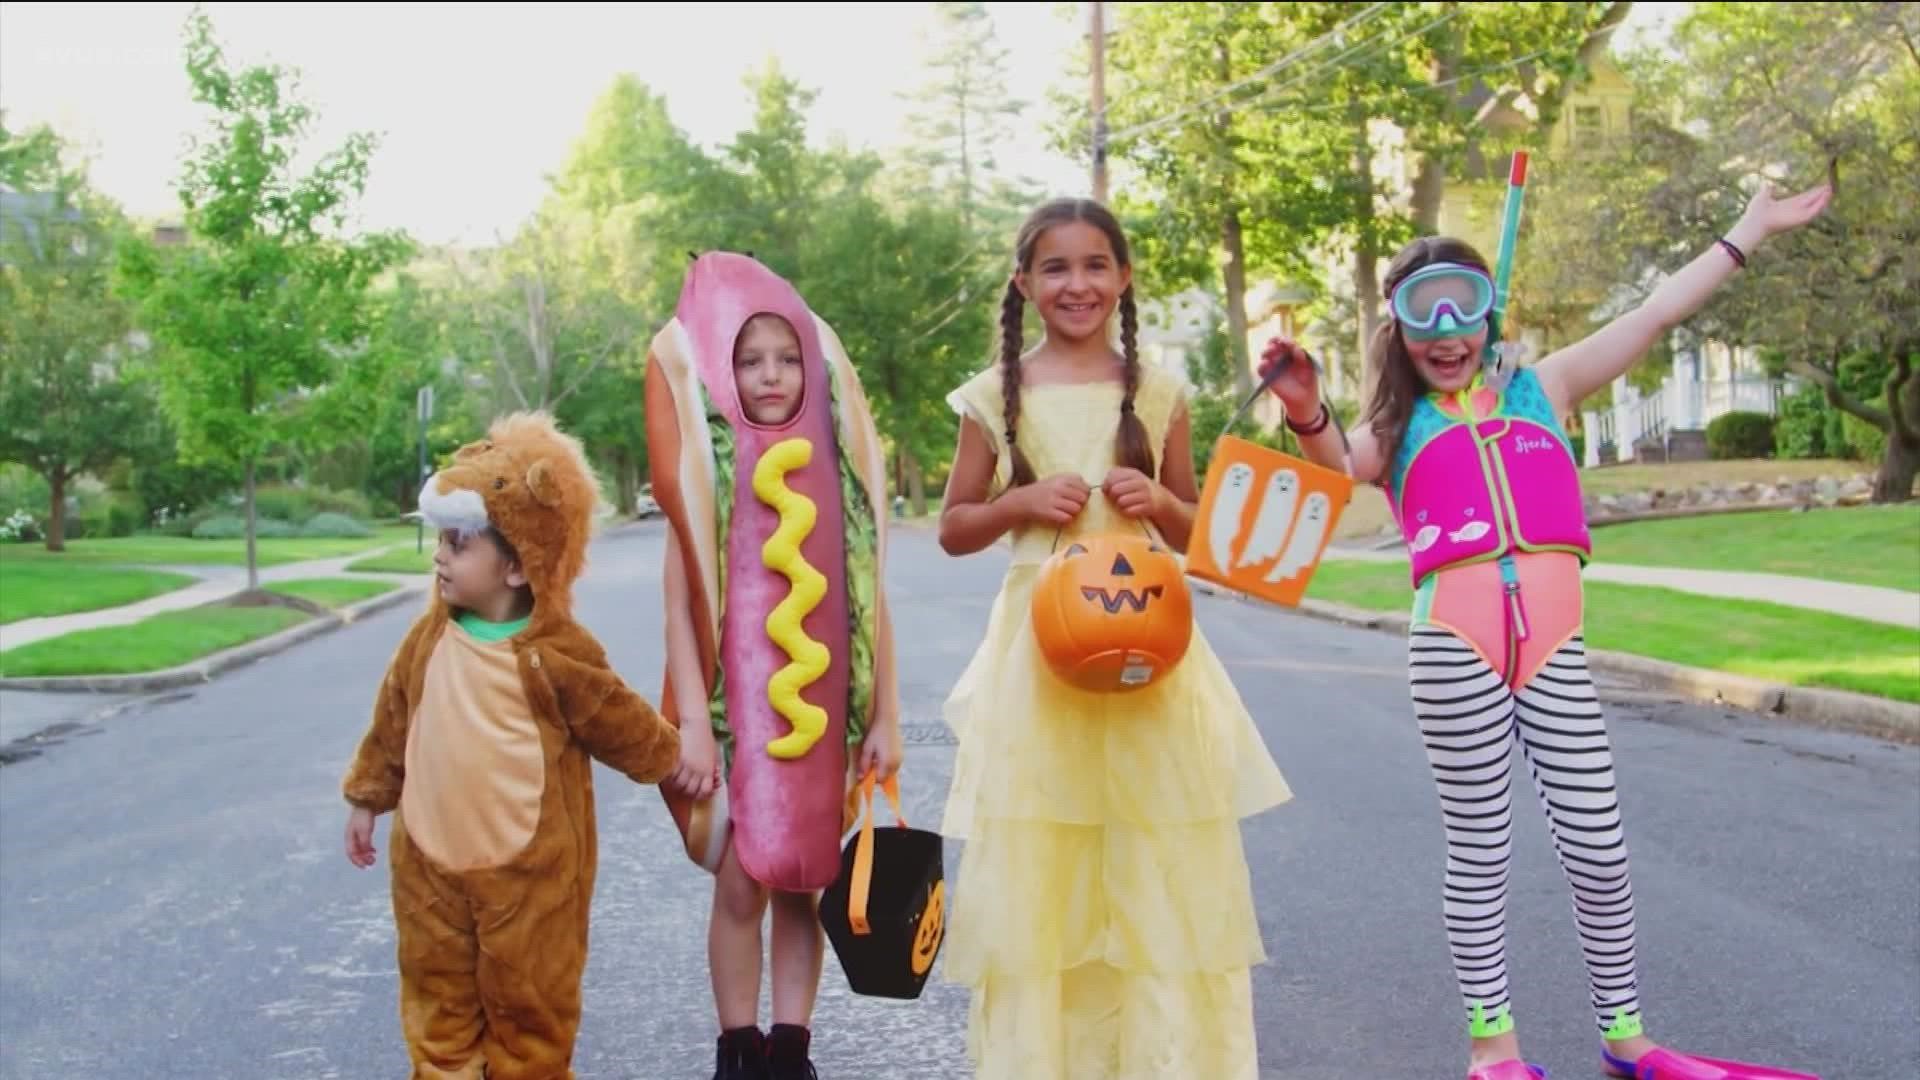 Dr. Anthony Fauci recently gave the green light for kids to go trick-or-treating this Halloween.